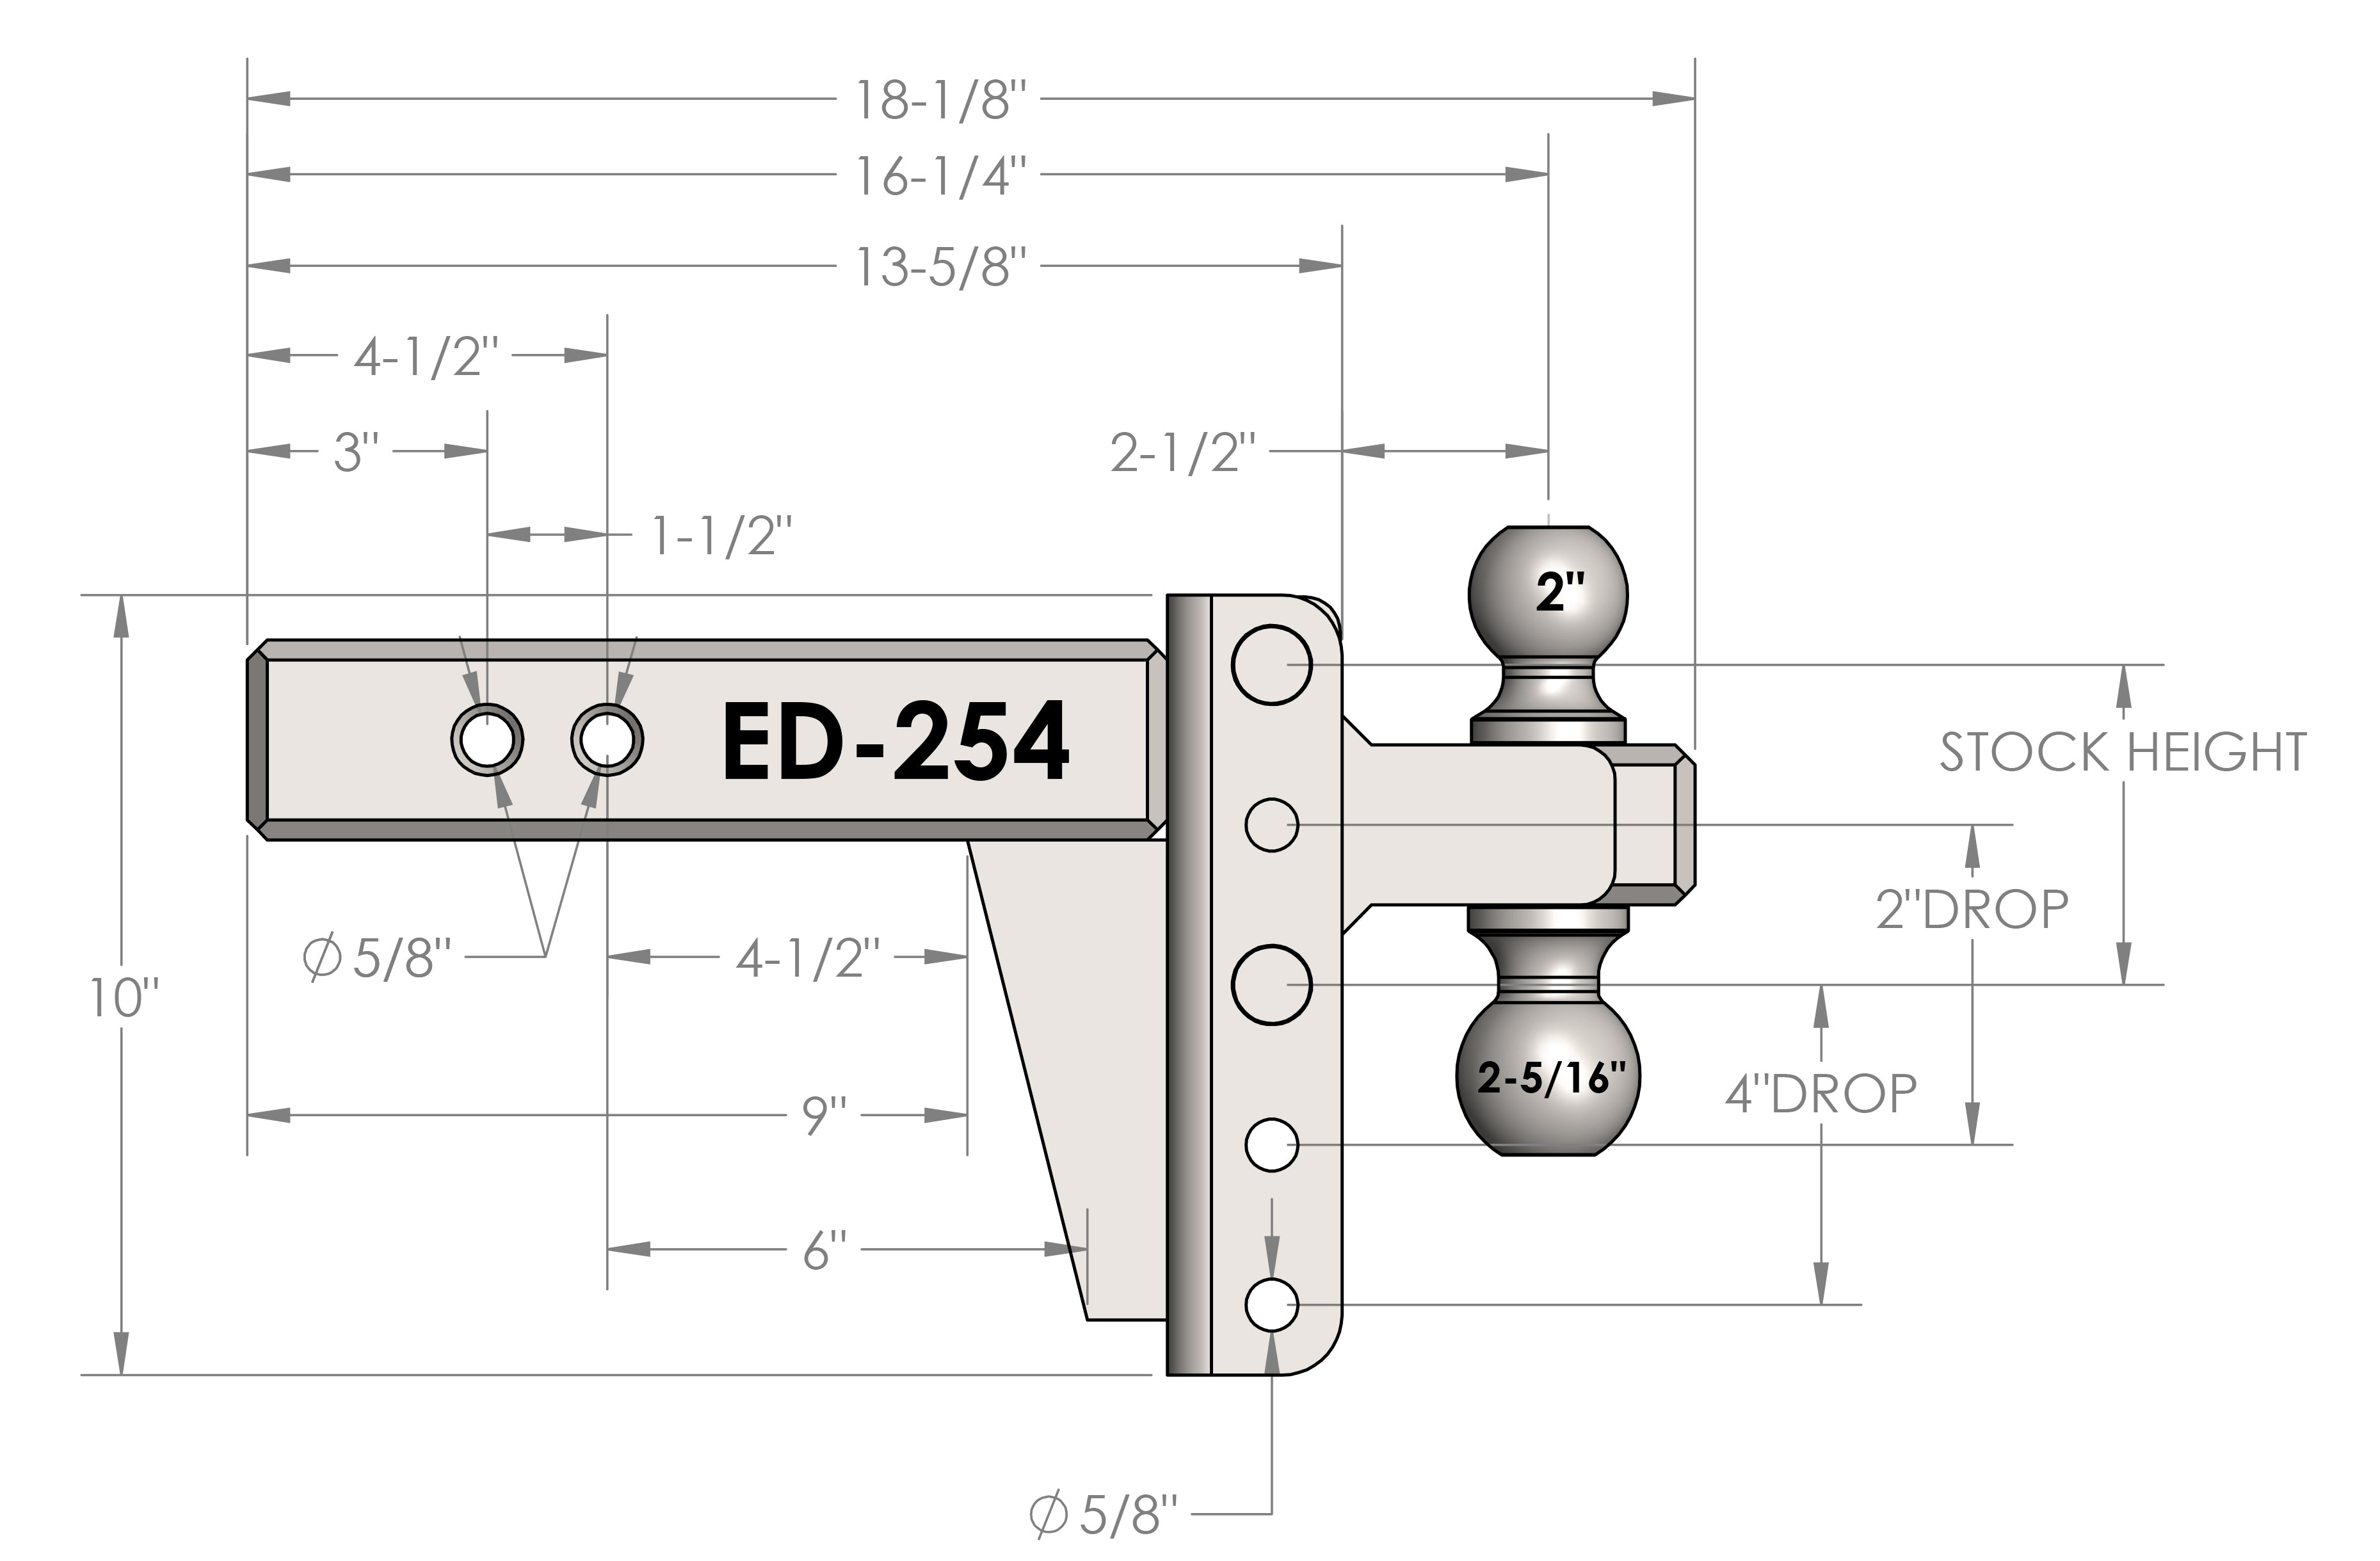 2.5" Extreme Duty 4" Drop/Rise Hitch Design Specification